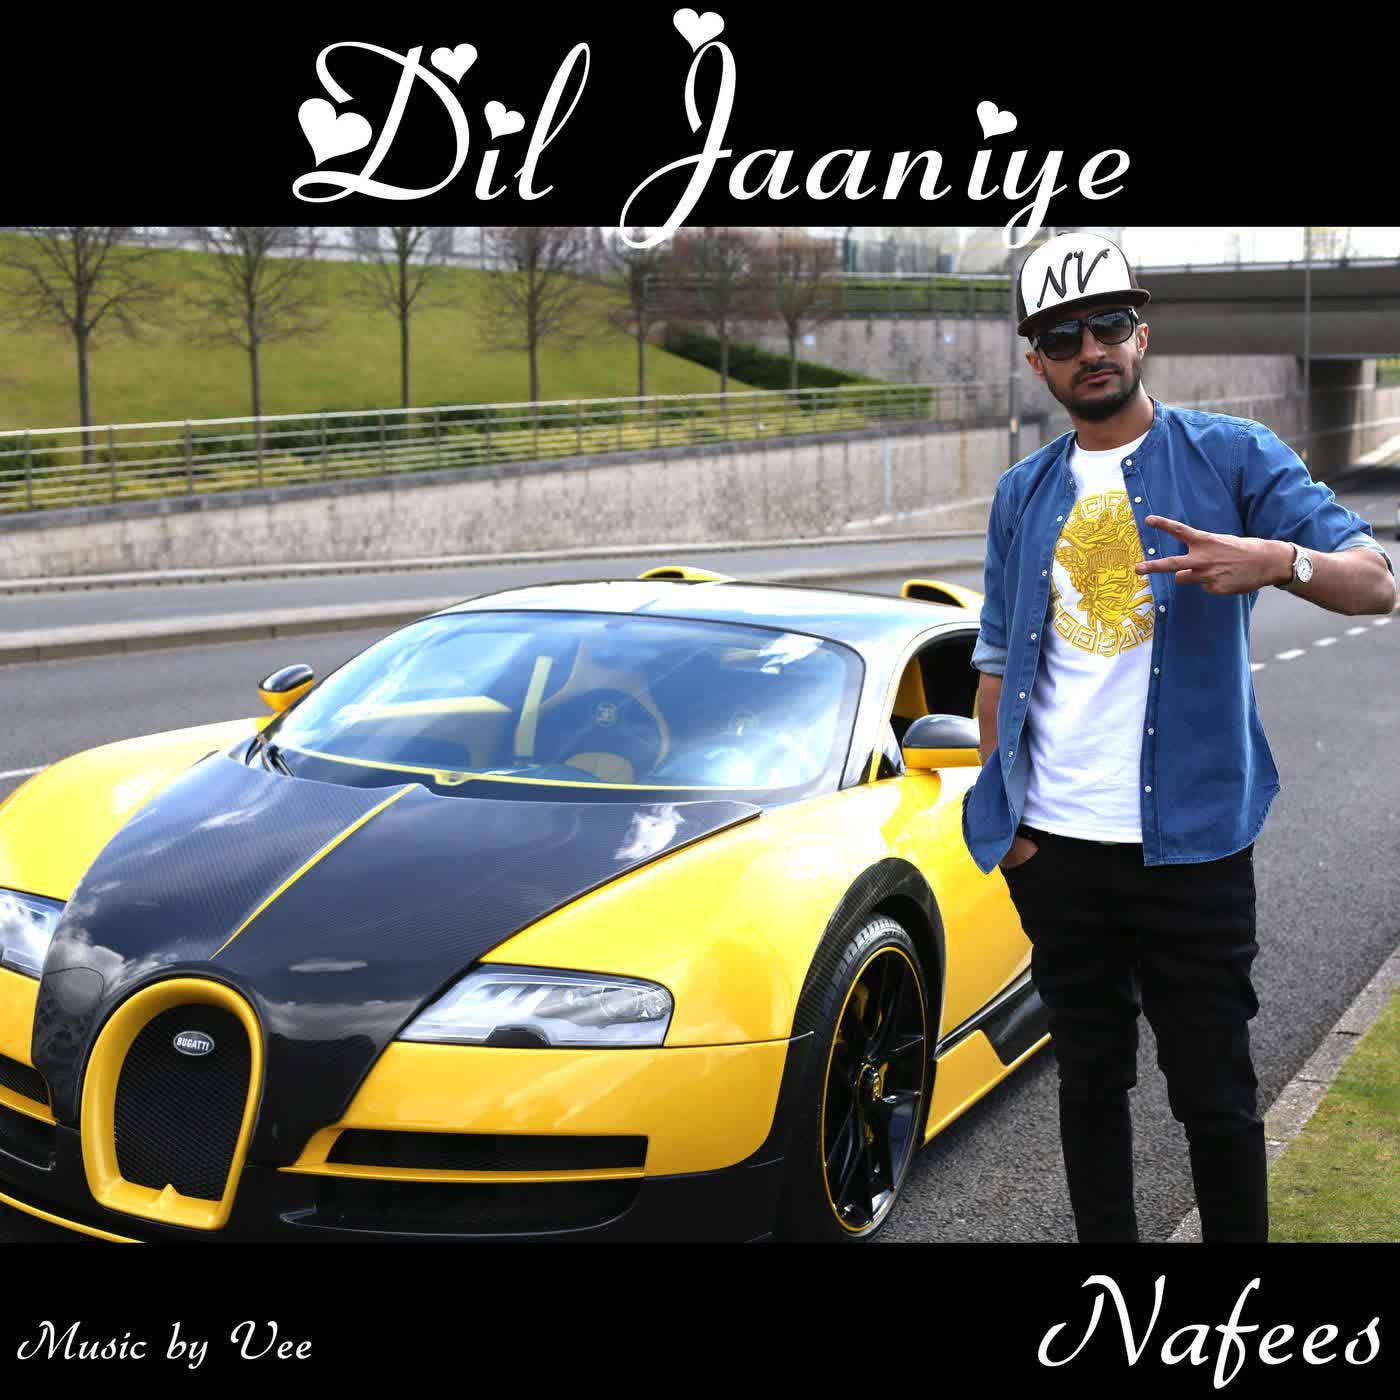 Dil Jaaniye Nafees  Mp3 song download